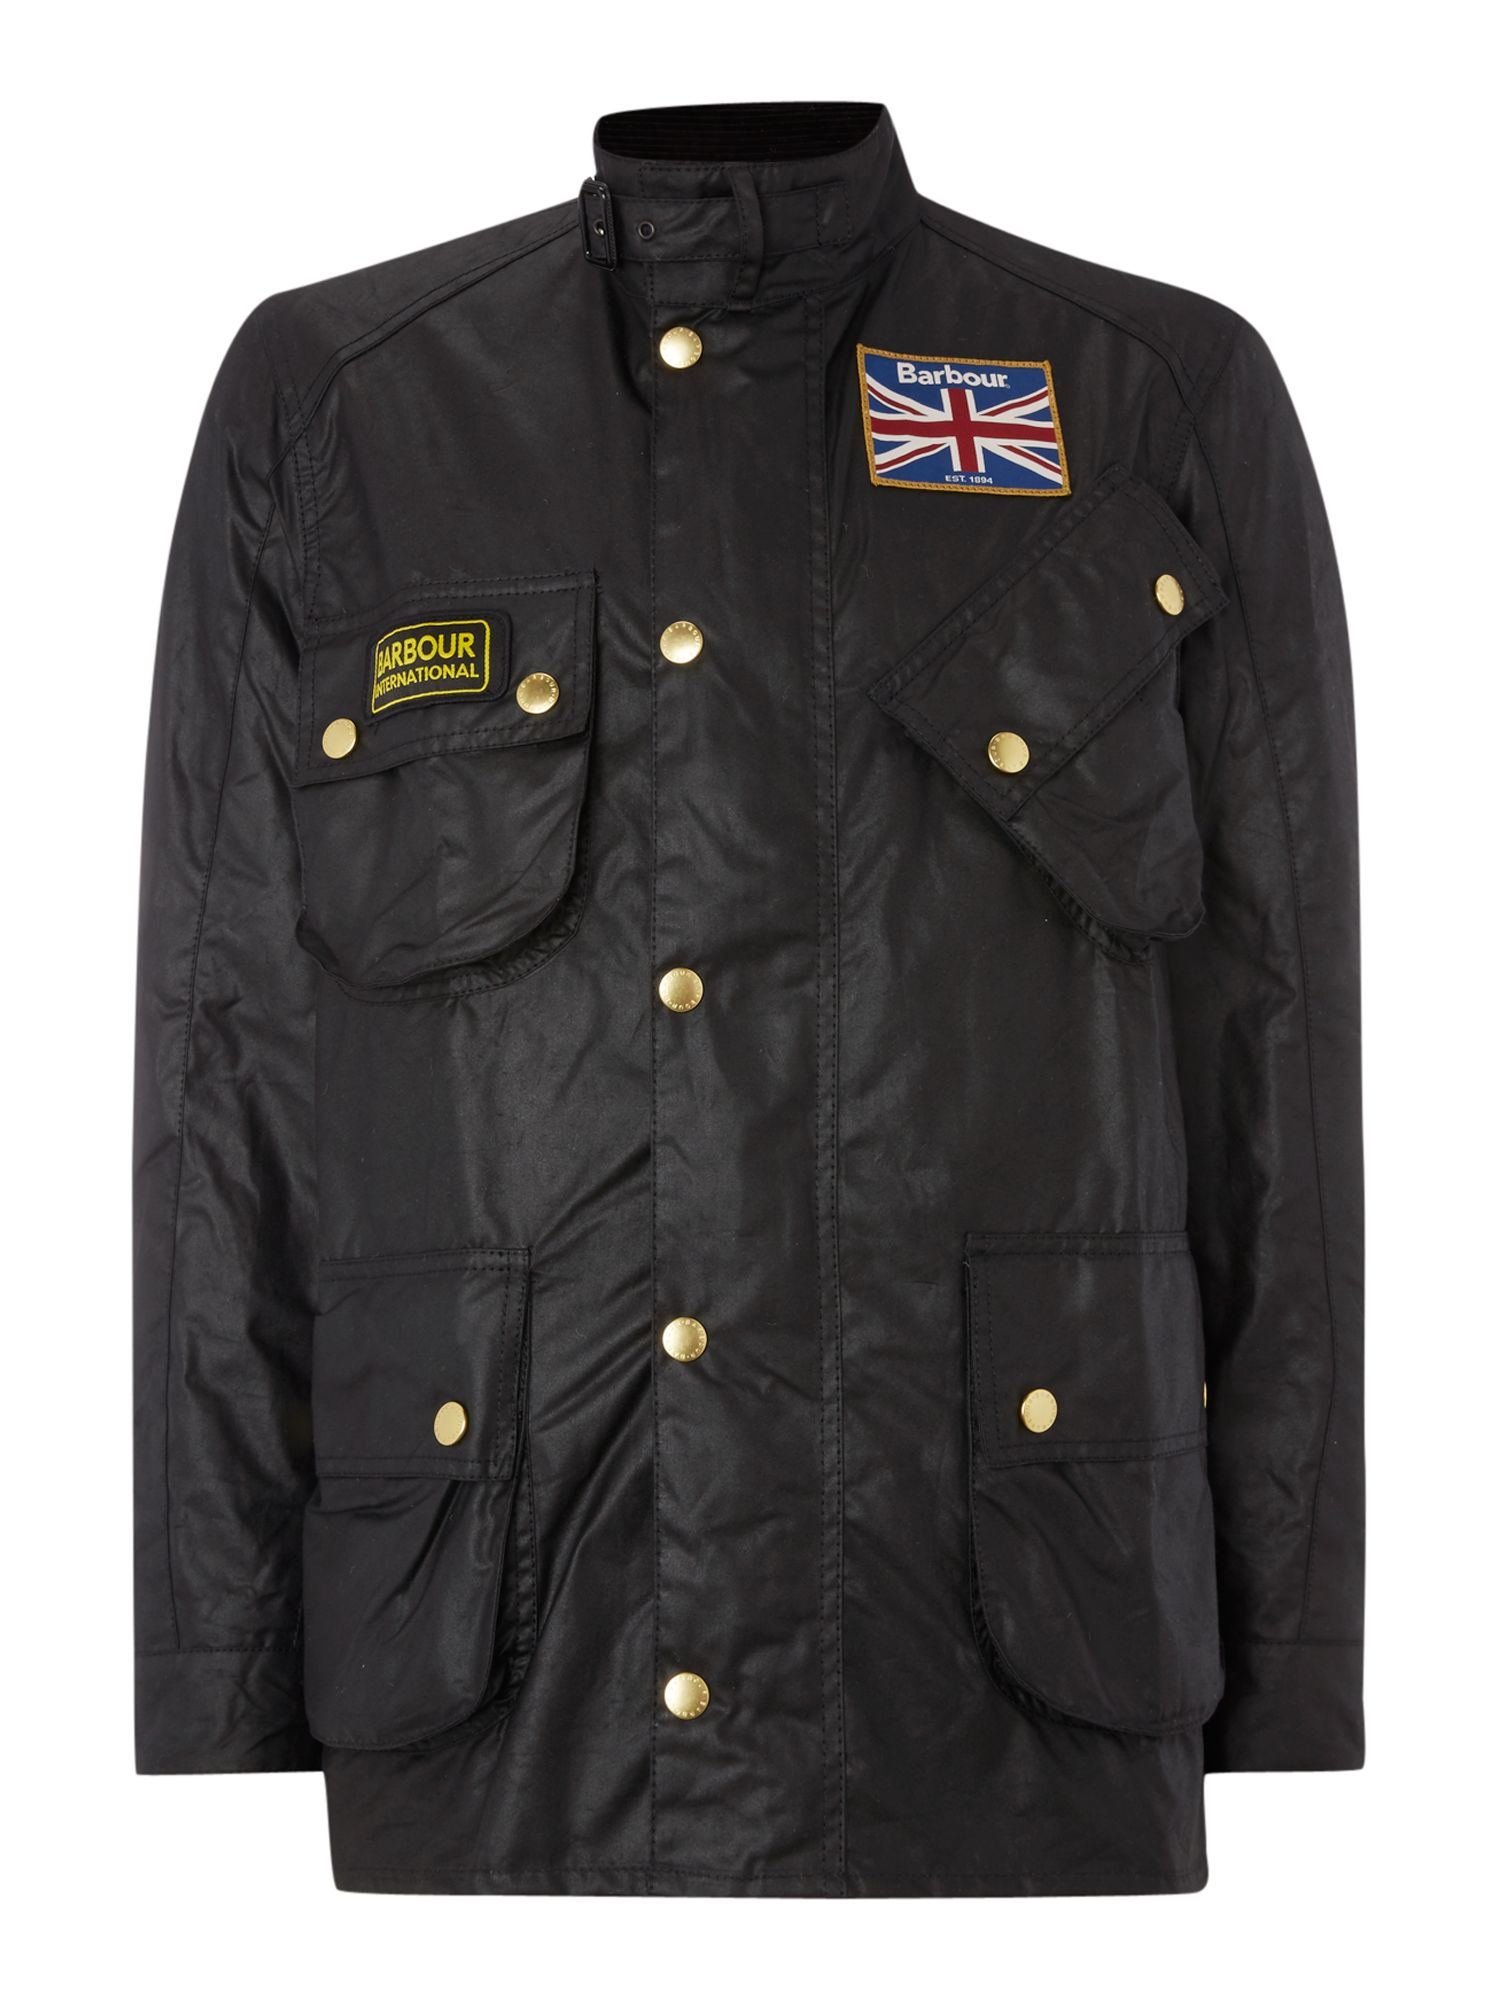 Barbour Union Jack Lined Motorcycle Jacket in Black for Men - Lyst